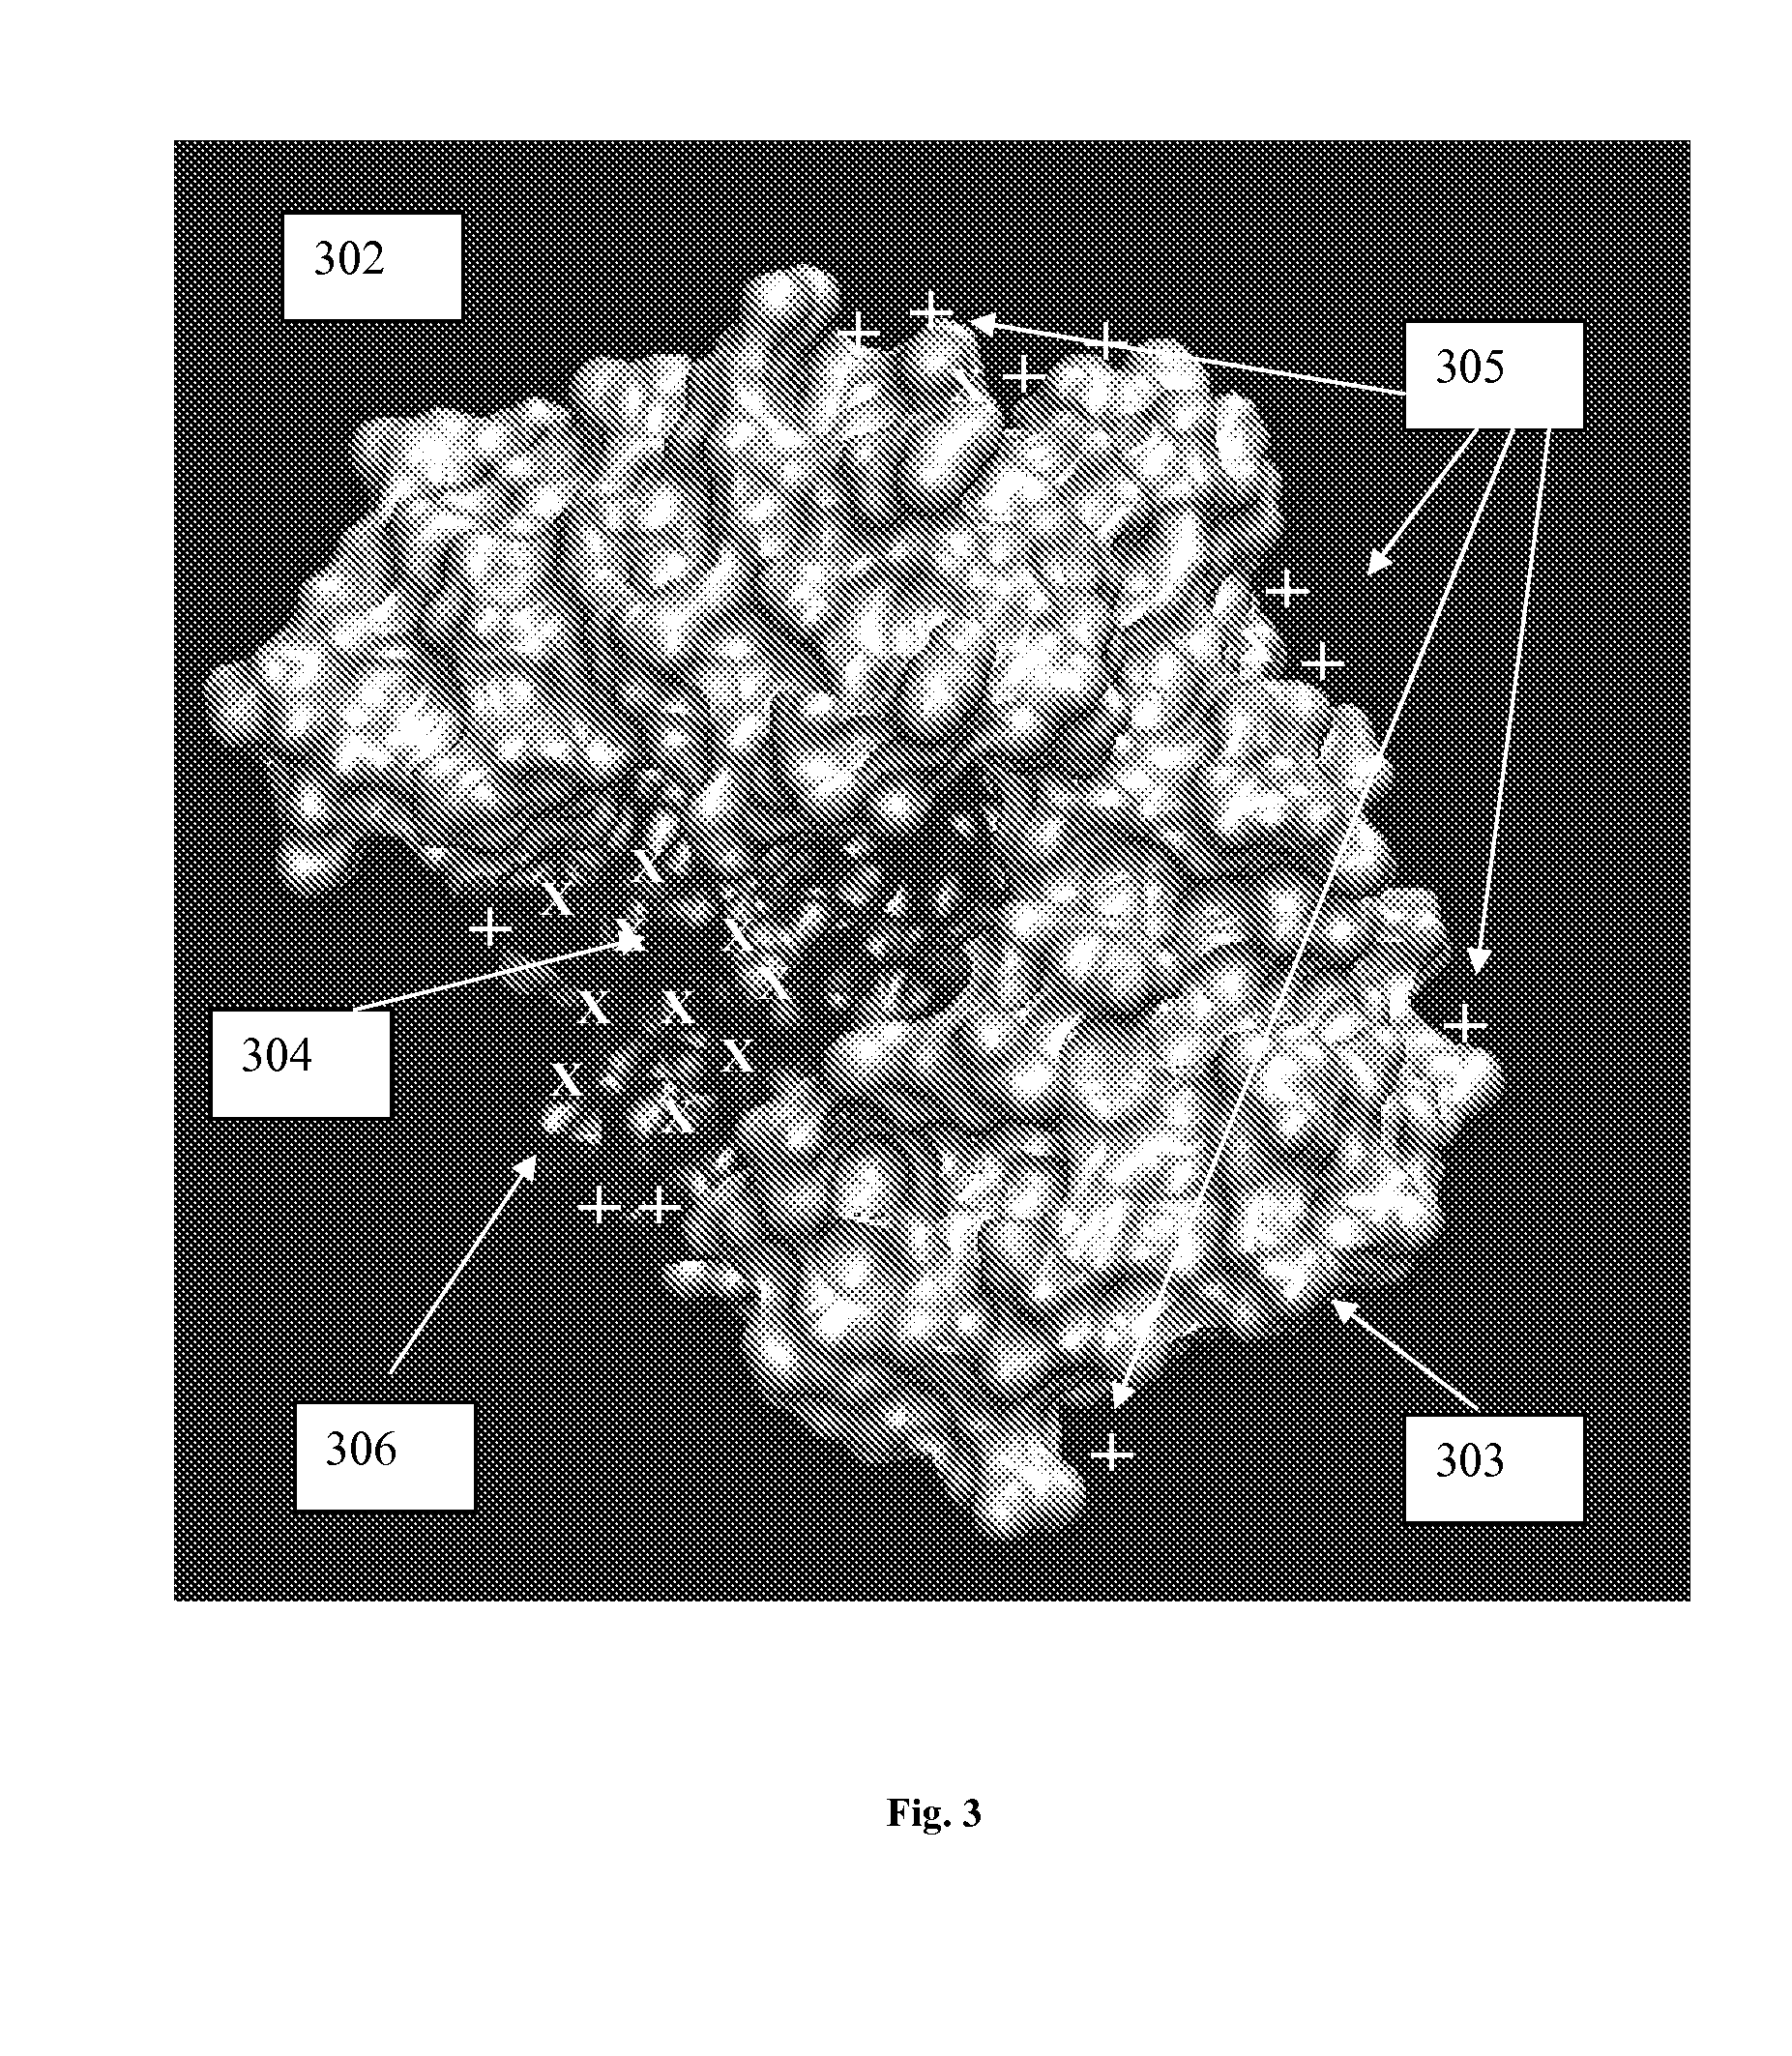 Method for Estimation of Location of Active Sites of Biopolymers Based on Virtual Library Screening